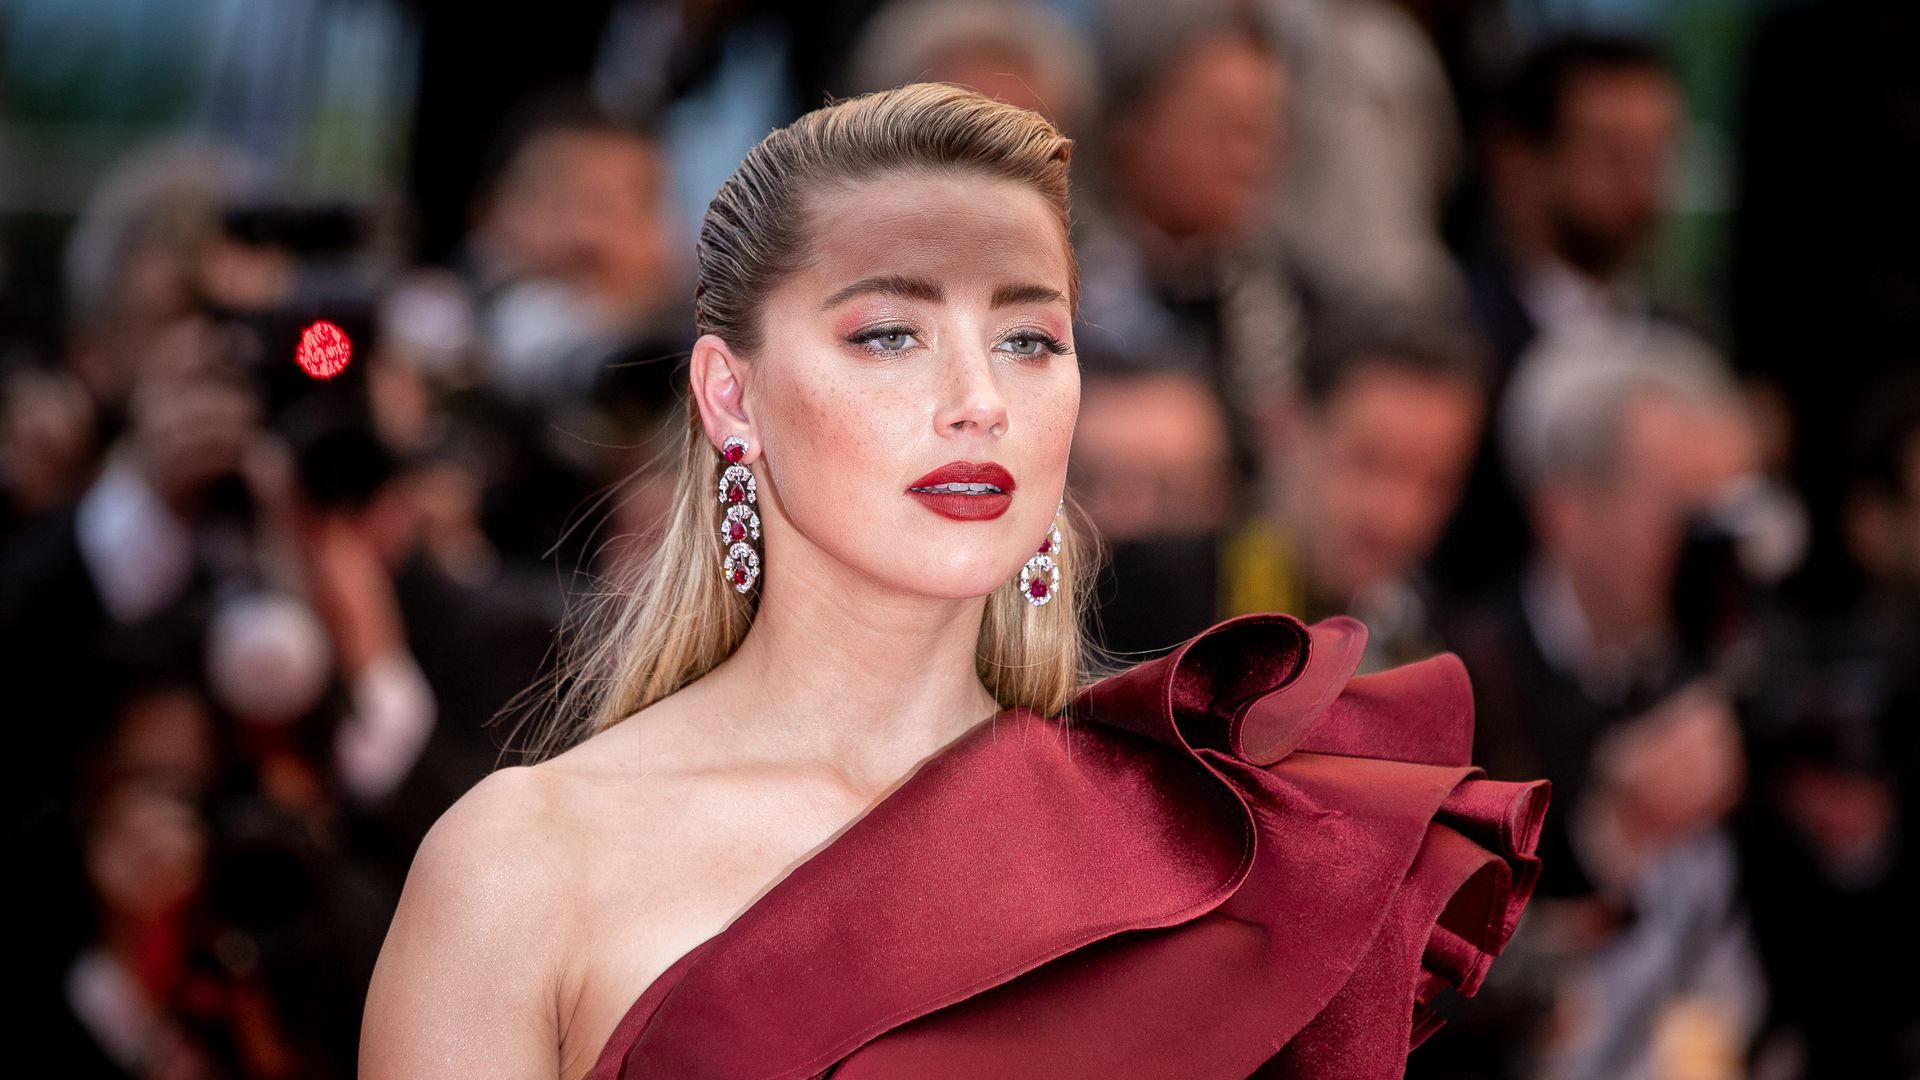 Amber Heard attends the screening of "Pain And Glory (Dolor Y Gloria/ Douleur Et Glorie)" during the 72nd annual Cannes Film Festival on May 17, 2019 in Cannes, France